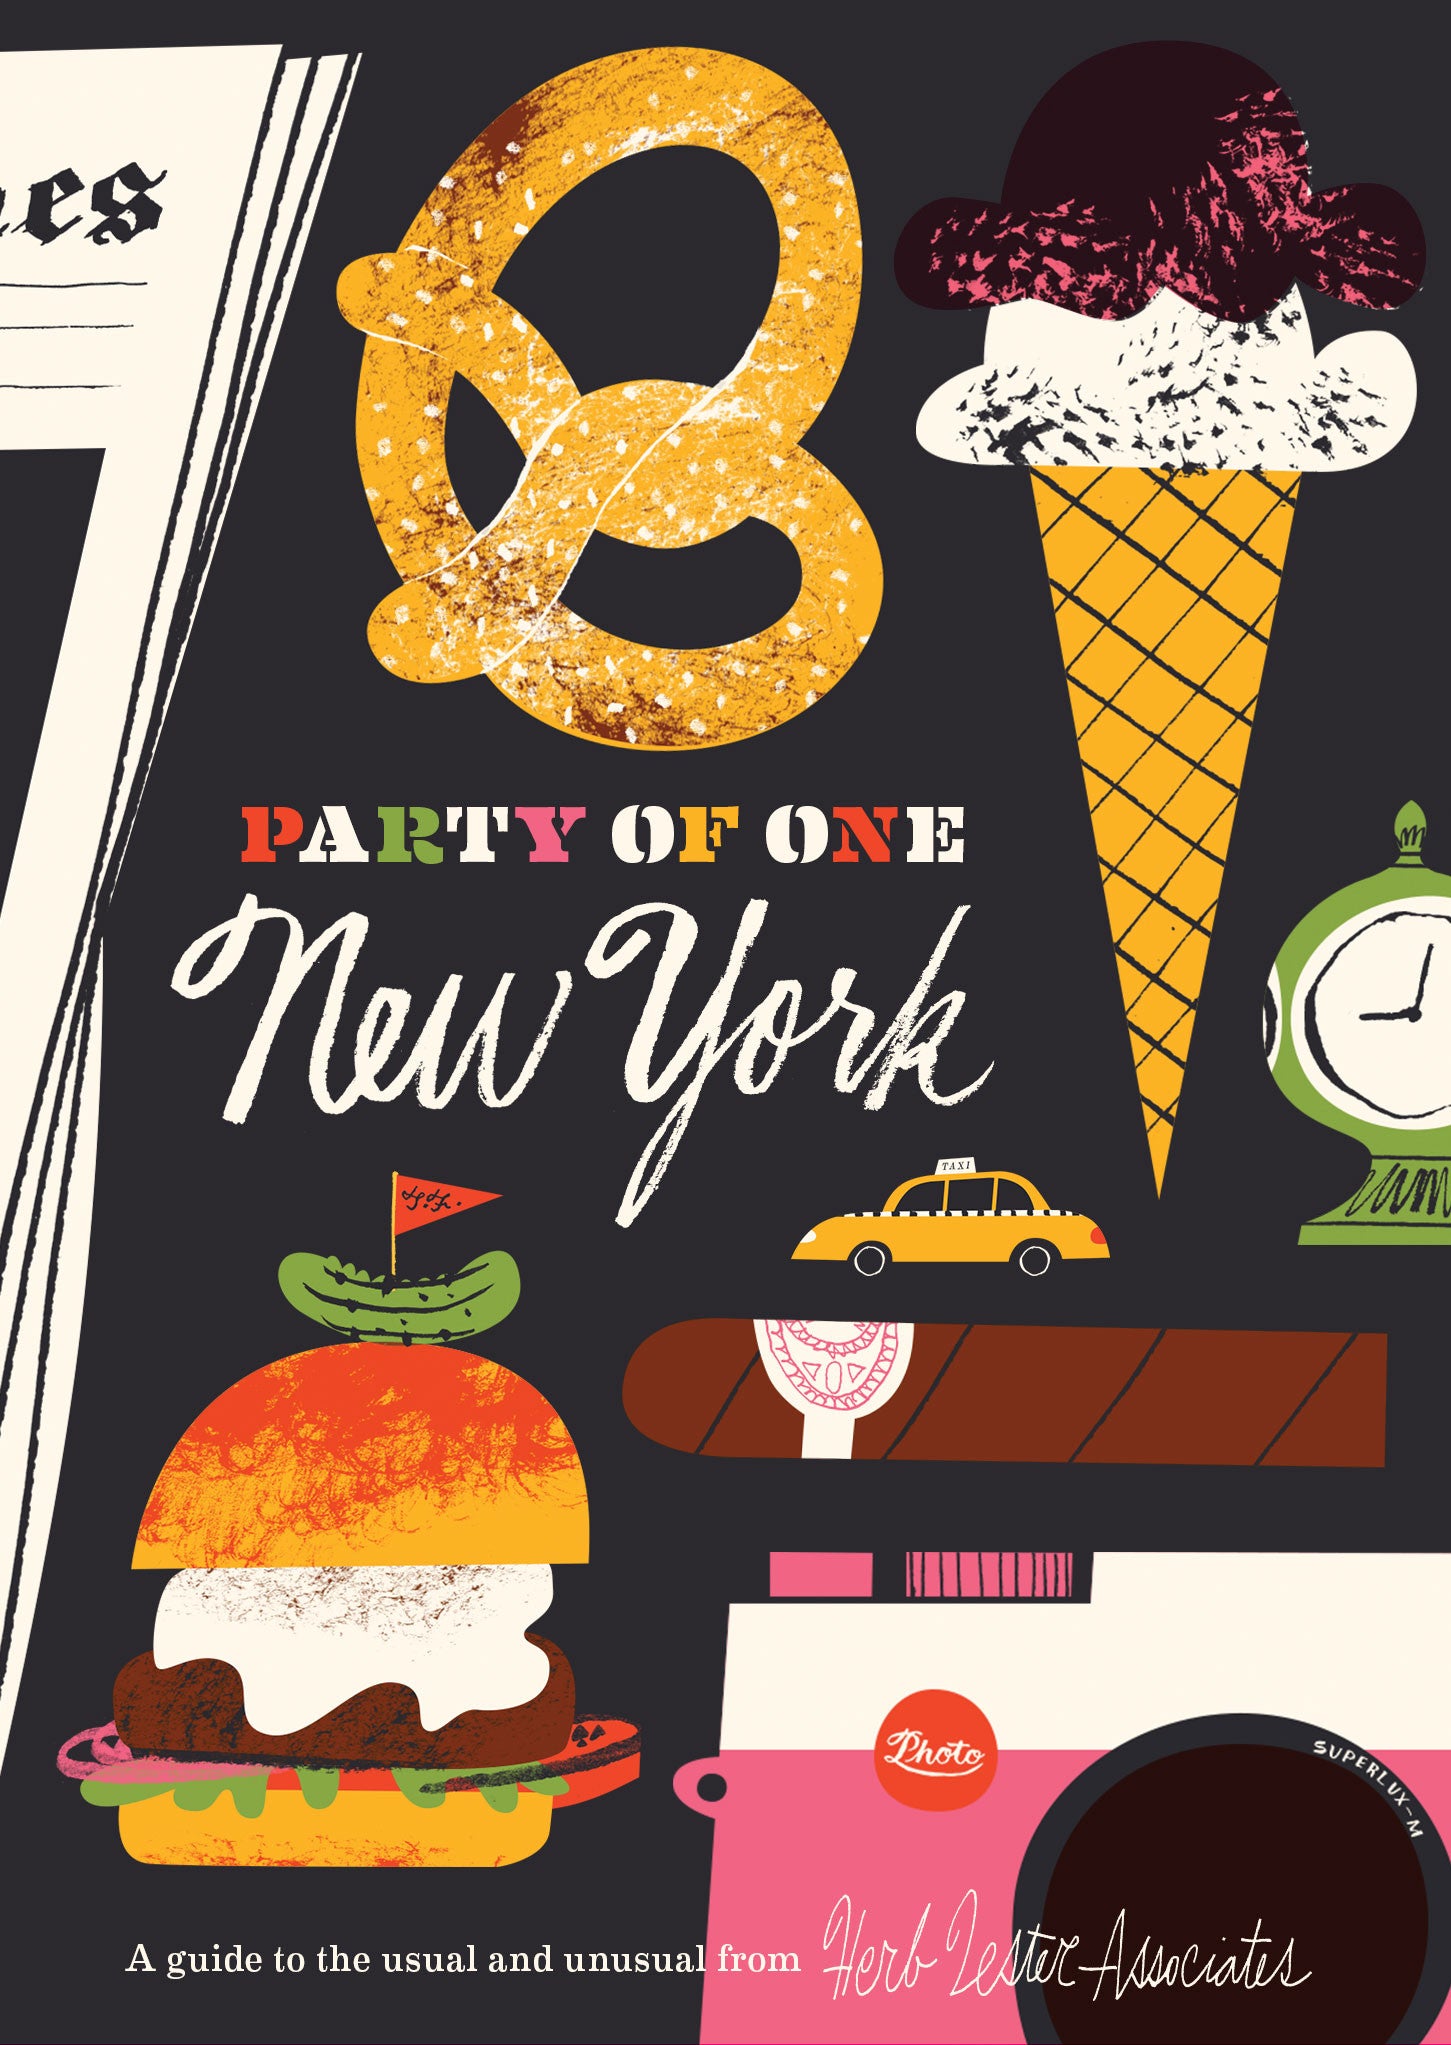 Party Of One: New York